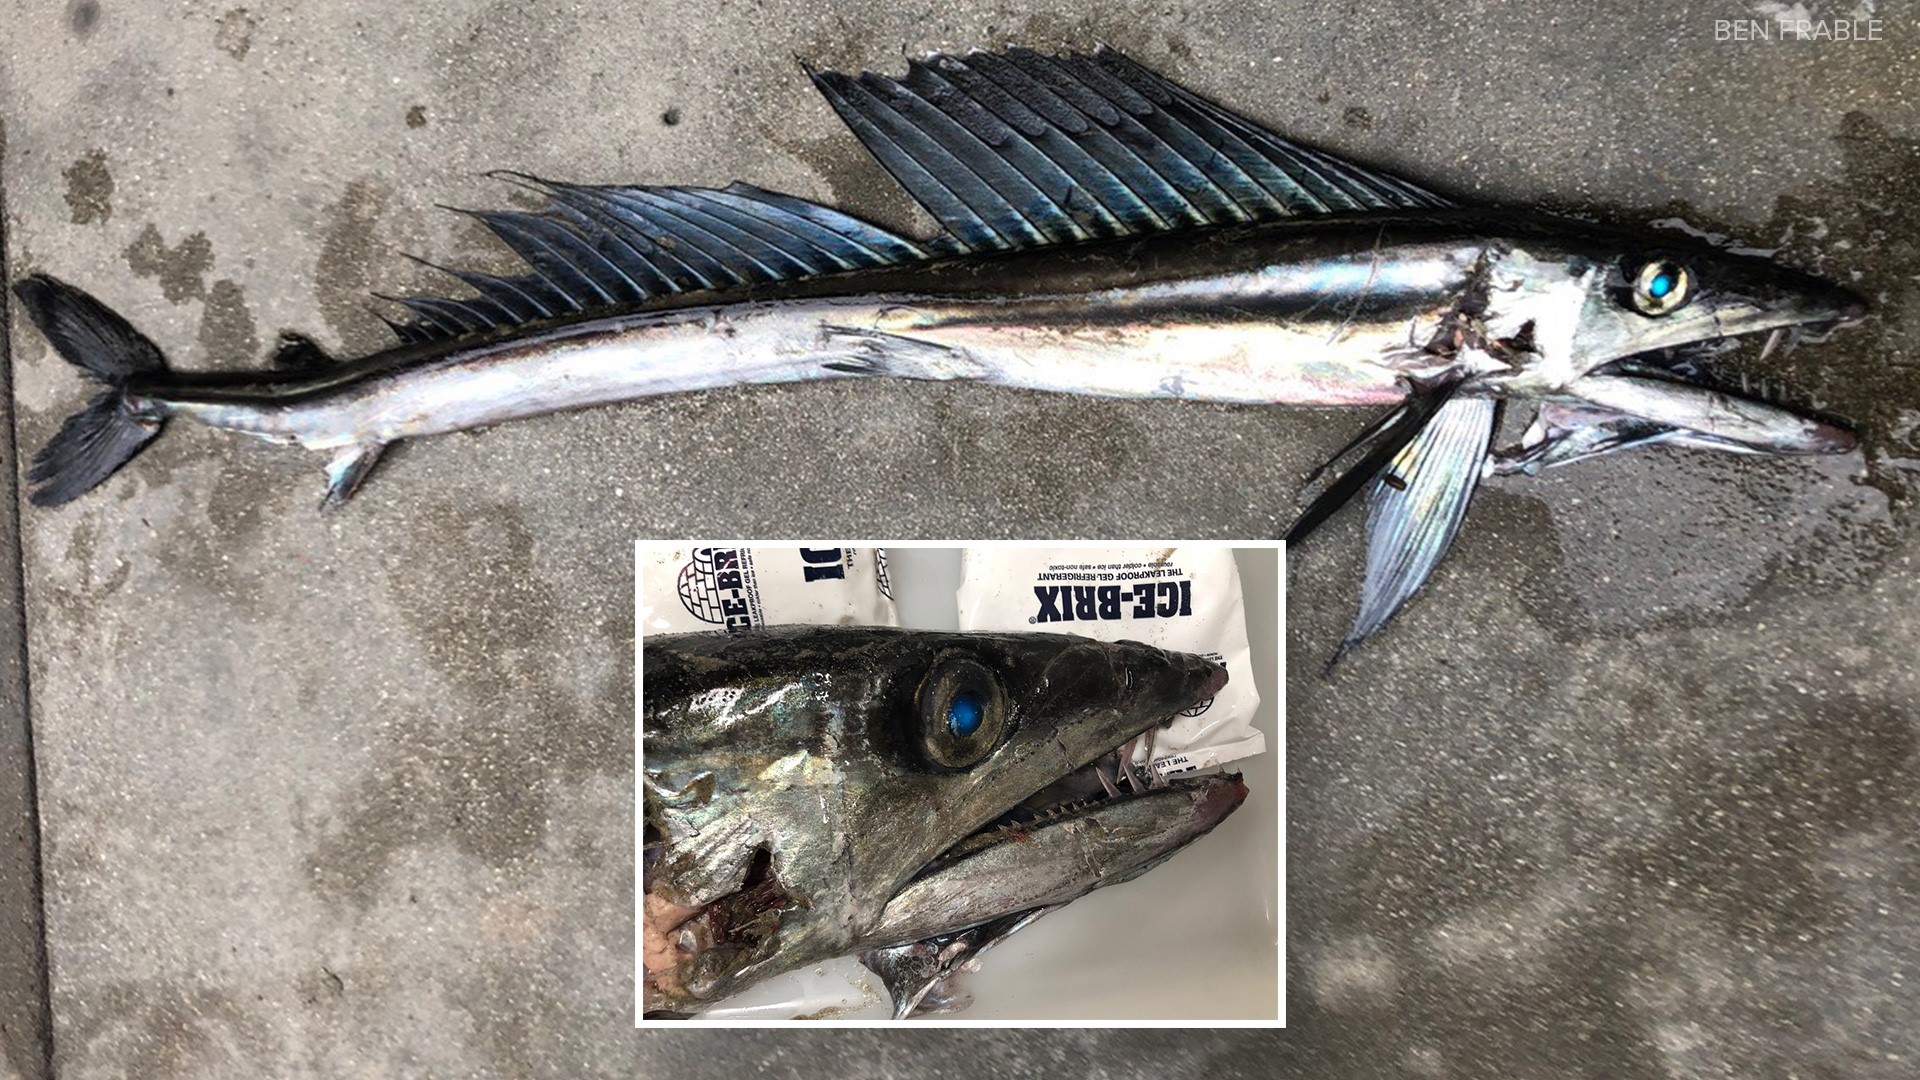 The lancetfish is typically found 6,000 feet beneath the ocean and its favorite food is the lancetfish. They're known cannibals.